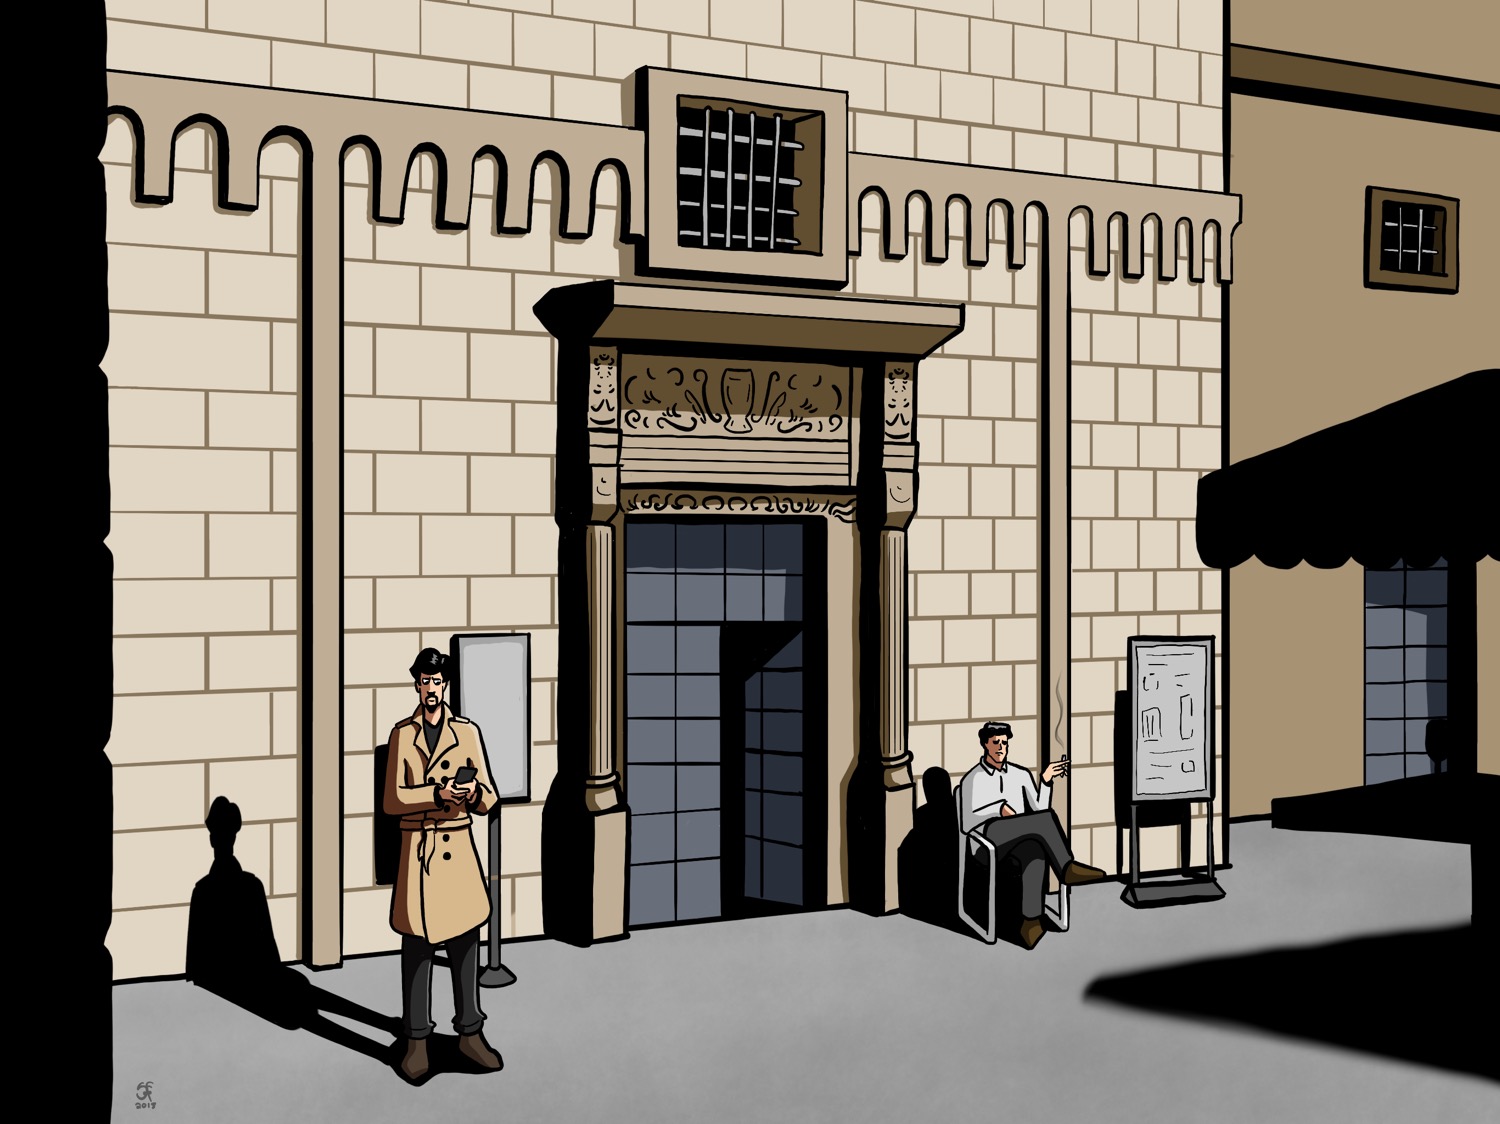 An illustration of the Chiesa di San Sebastiano church in Lecce, with our man in a trenchcoat in front of it and a suspicious stranger seated smoking a cigarette.